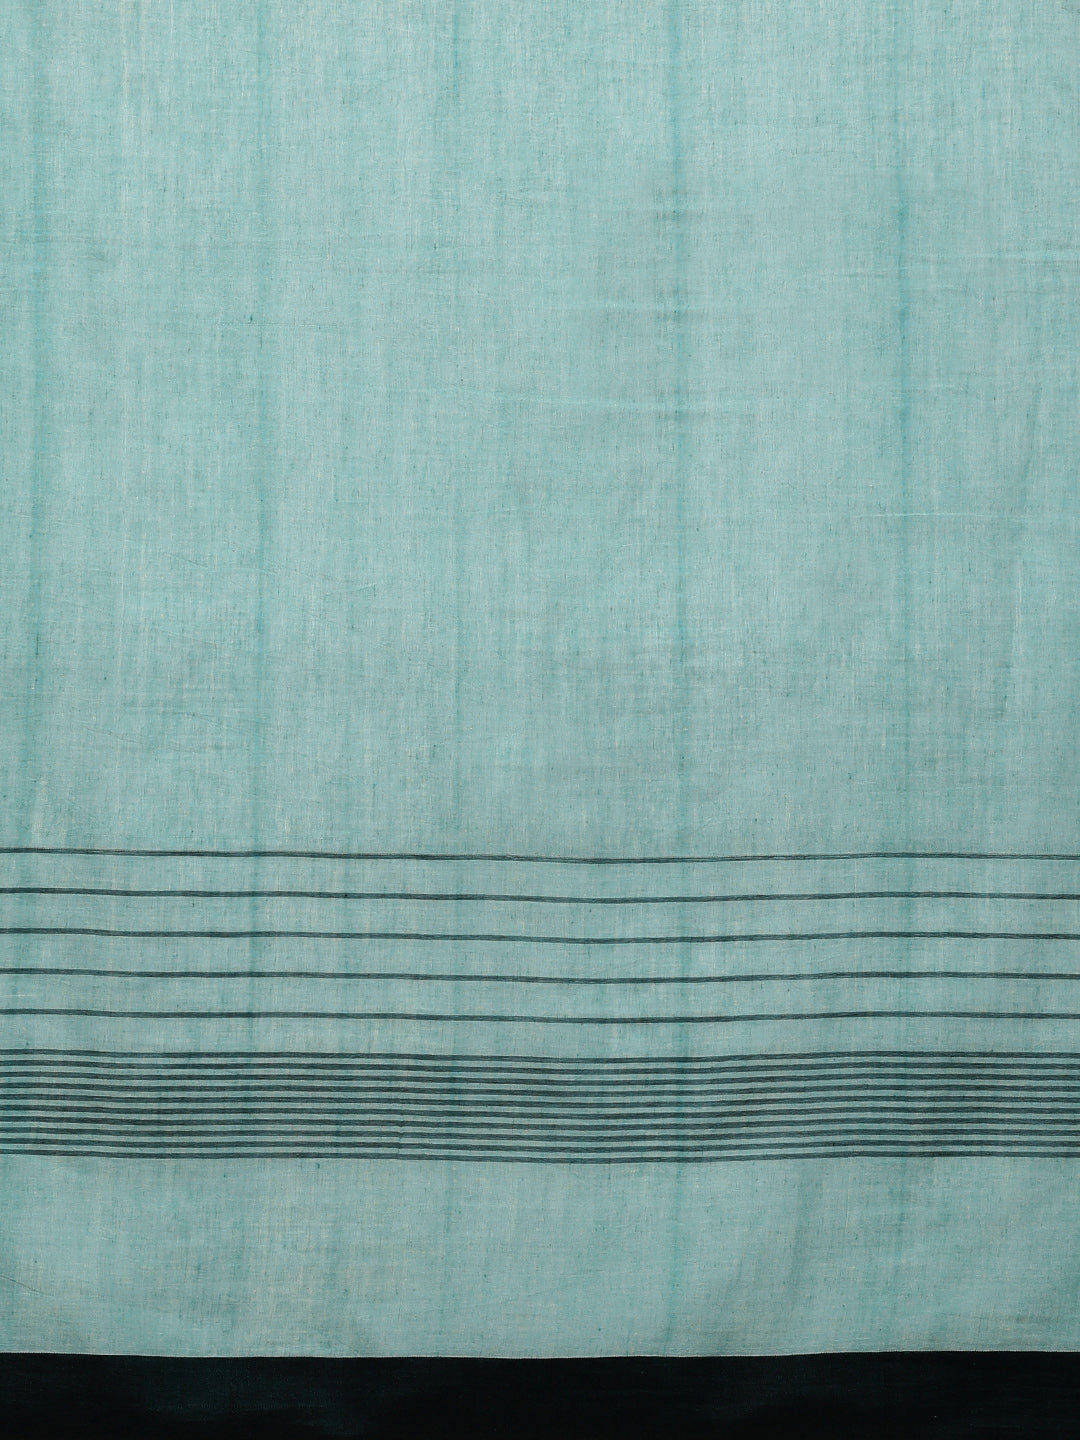 Sky Blue Grey Handcrafted Cotton Saree with pompoms